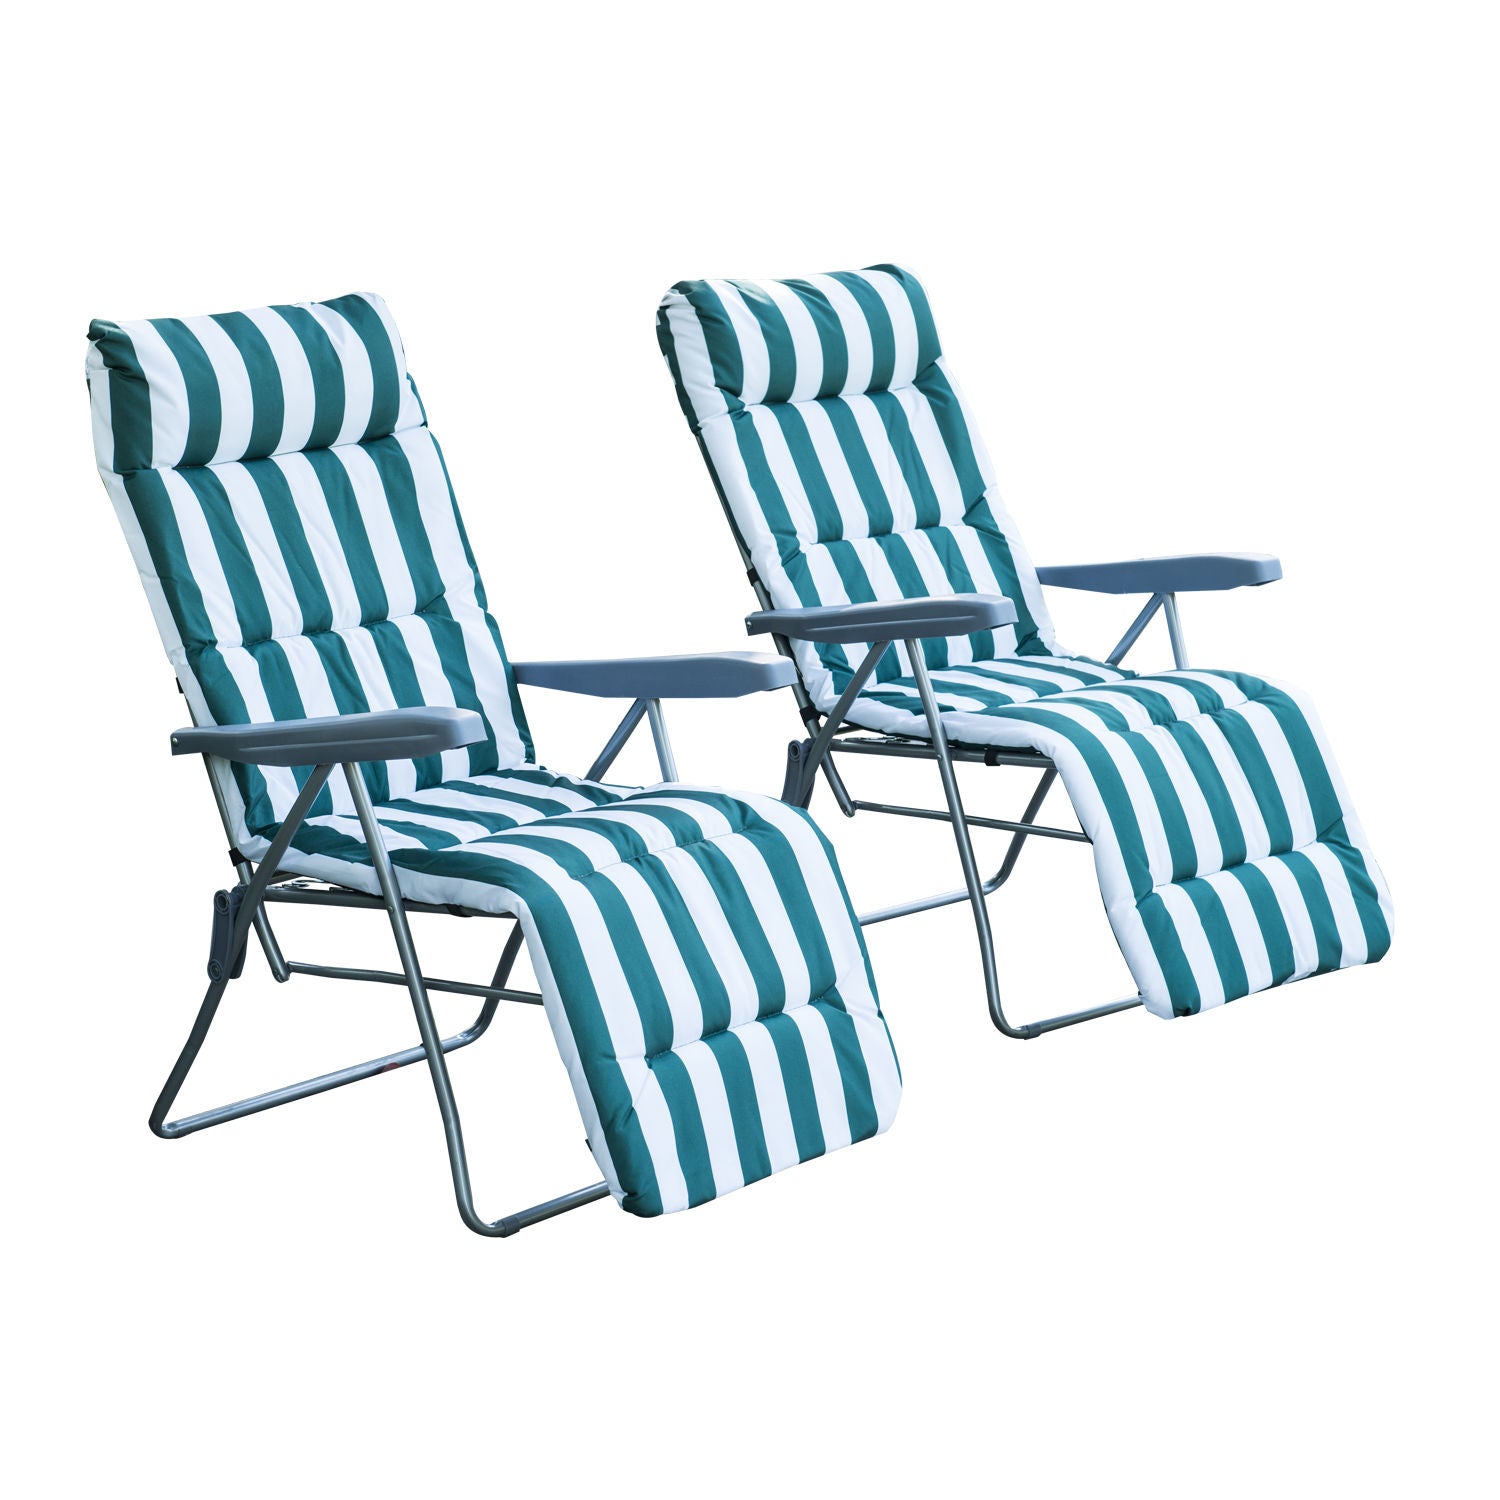 Nancy's Cary Garden Chairs - Lounger - Set of 2 - Collapsible - 5 Positions - Adjustable - Green - White - 60 x 75 x 104 cm